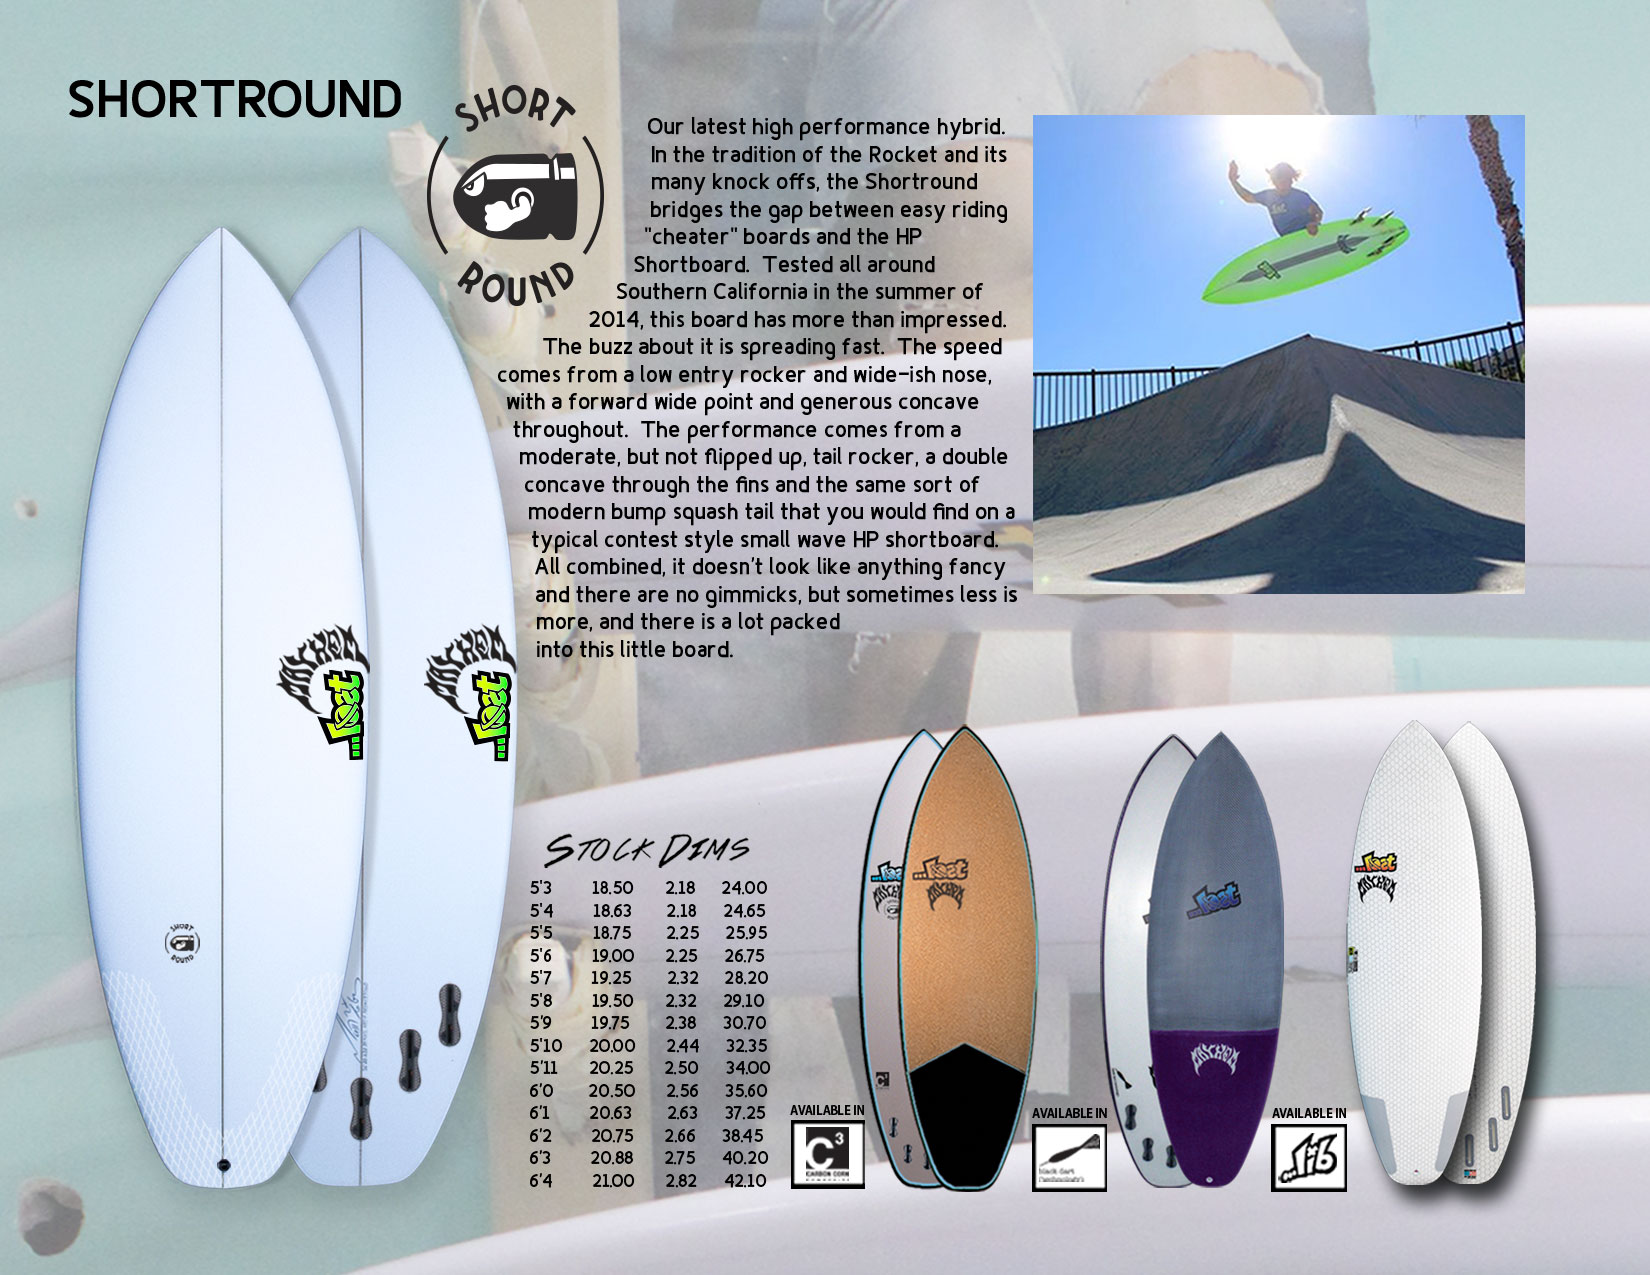 Lost Surfboards Short Round, its main pros and cons